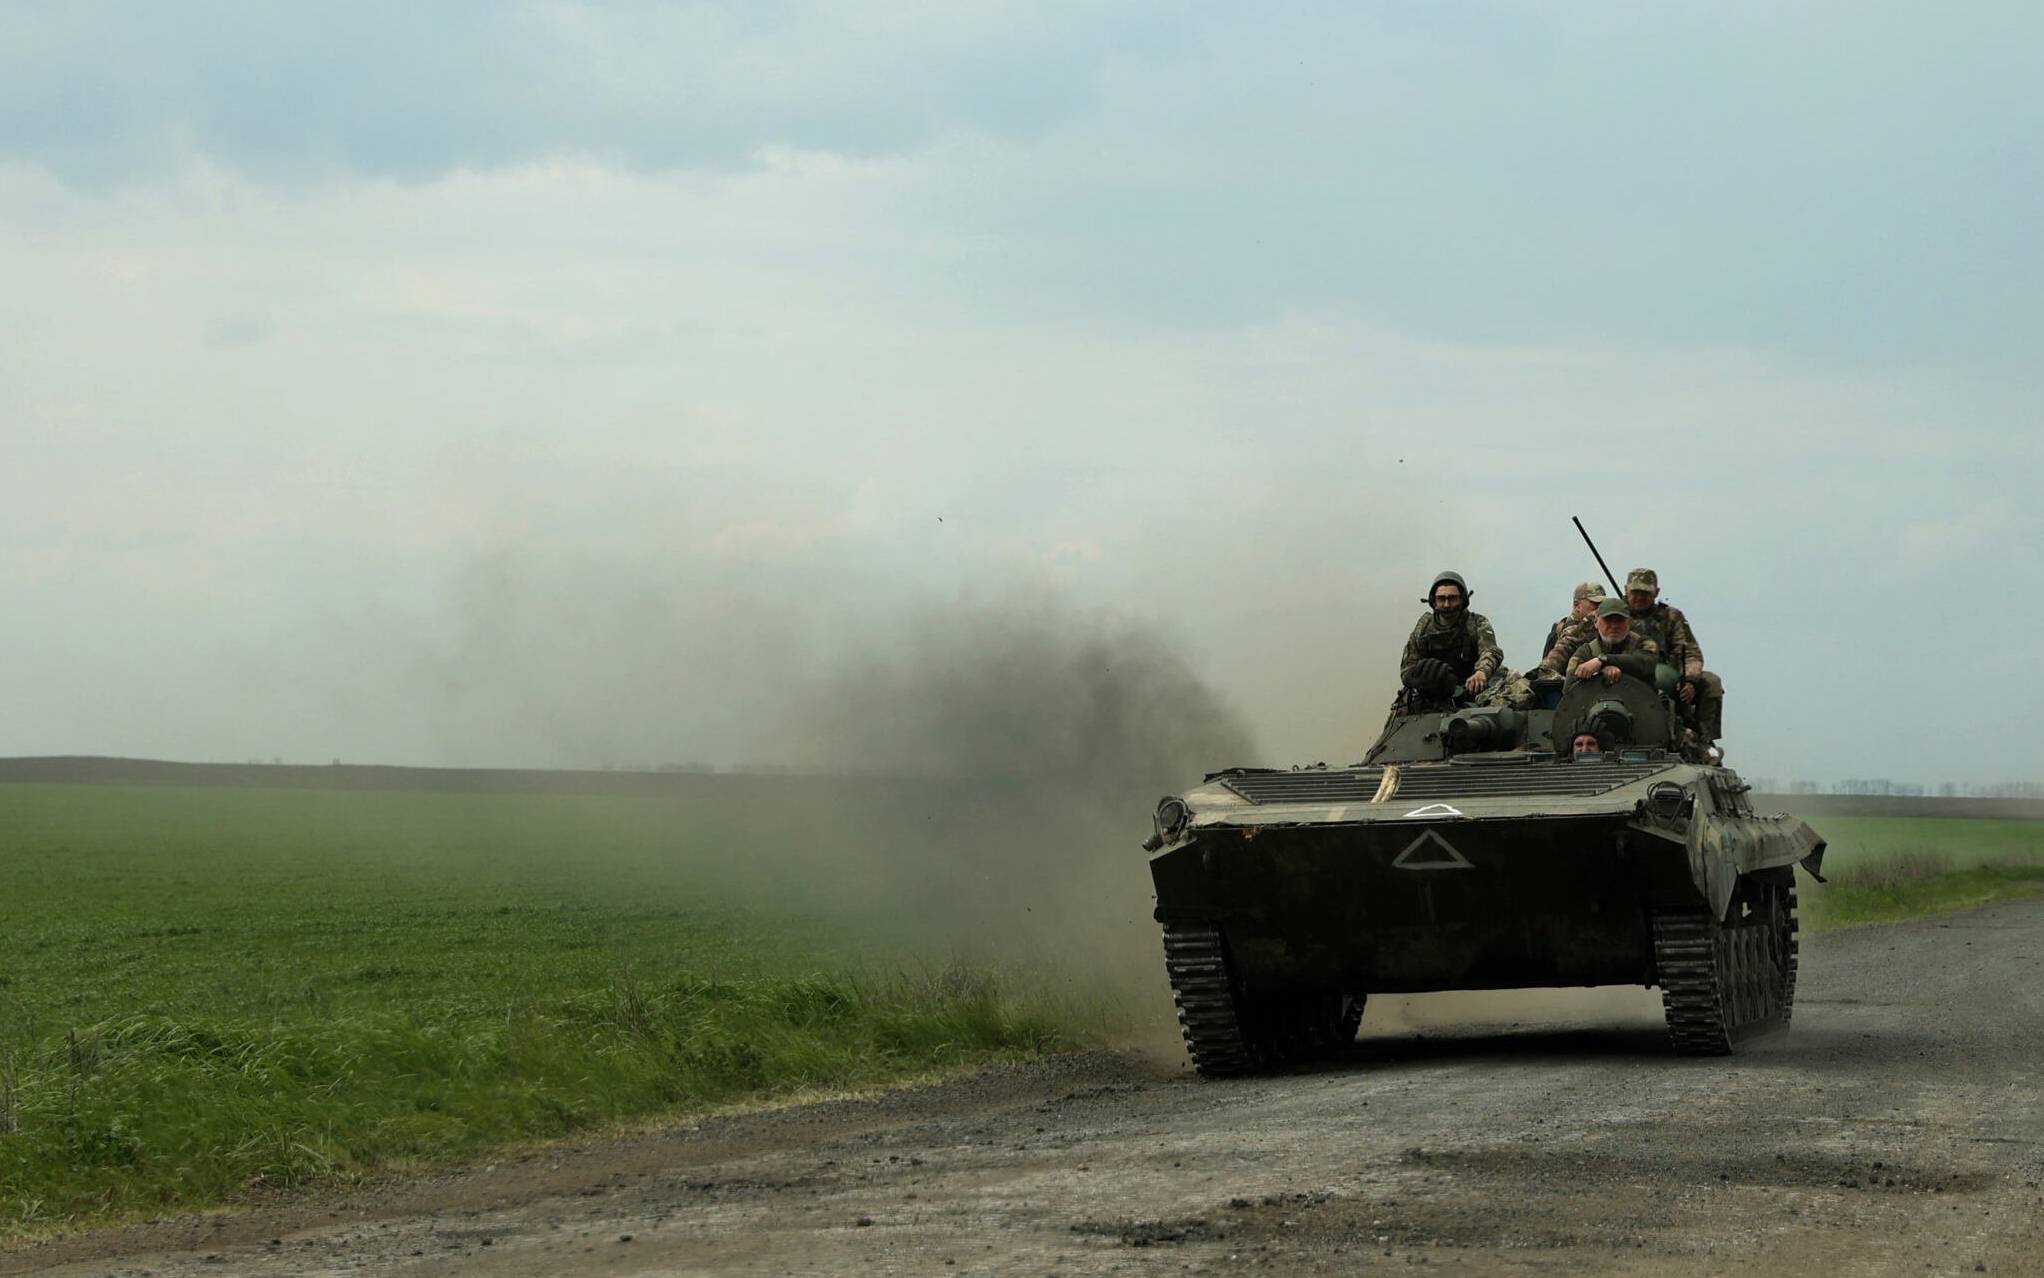 Ukrainian servicemen ride on an armored personnel carrier (APC) on a road near Petrivske village, in Kharkiv region, amid the Russian invasion of Ukraine, on May 9, 2022. (Photo by Anatolii Stepanov / AFP)